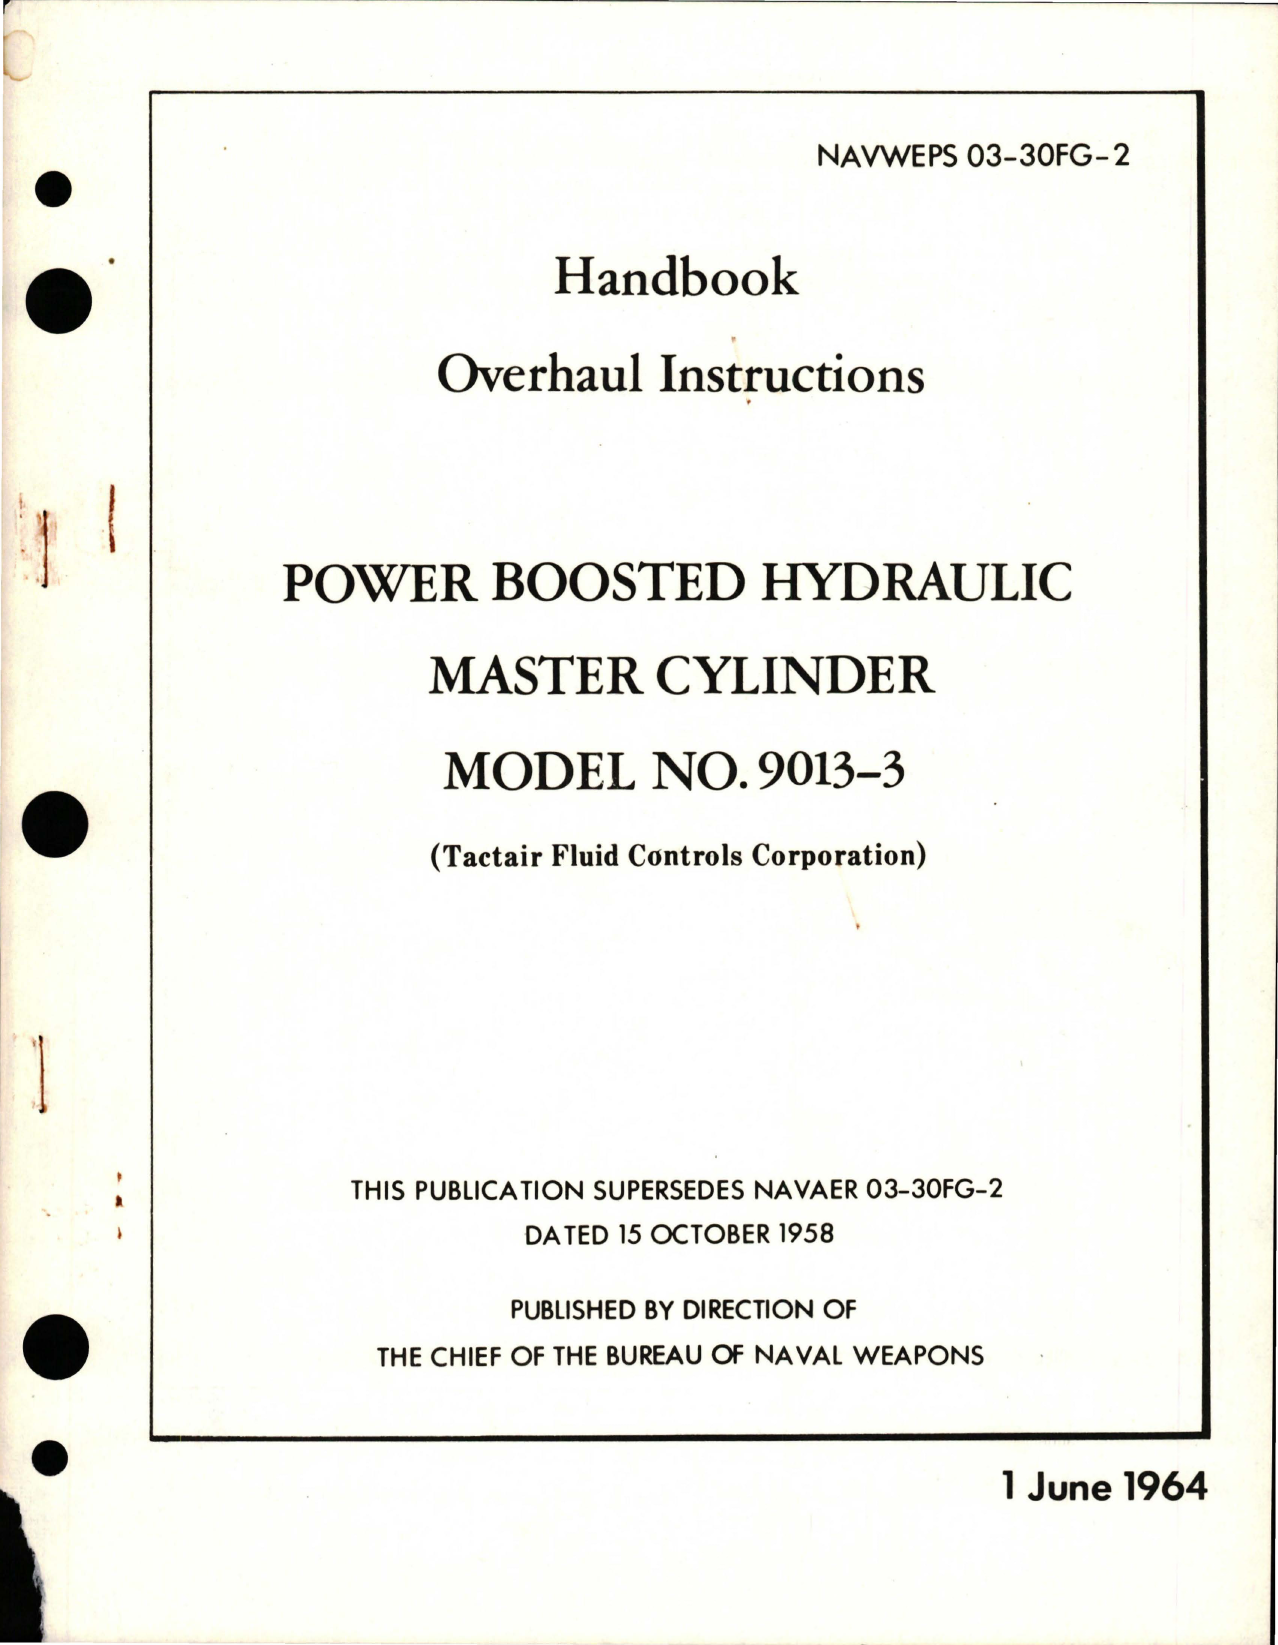 Sample page 1 from AirCorps Library document: Overhaul Instructions for Power Boosted Hydraulic Master Cylinder - Model 9013-3